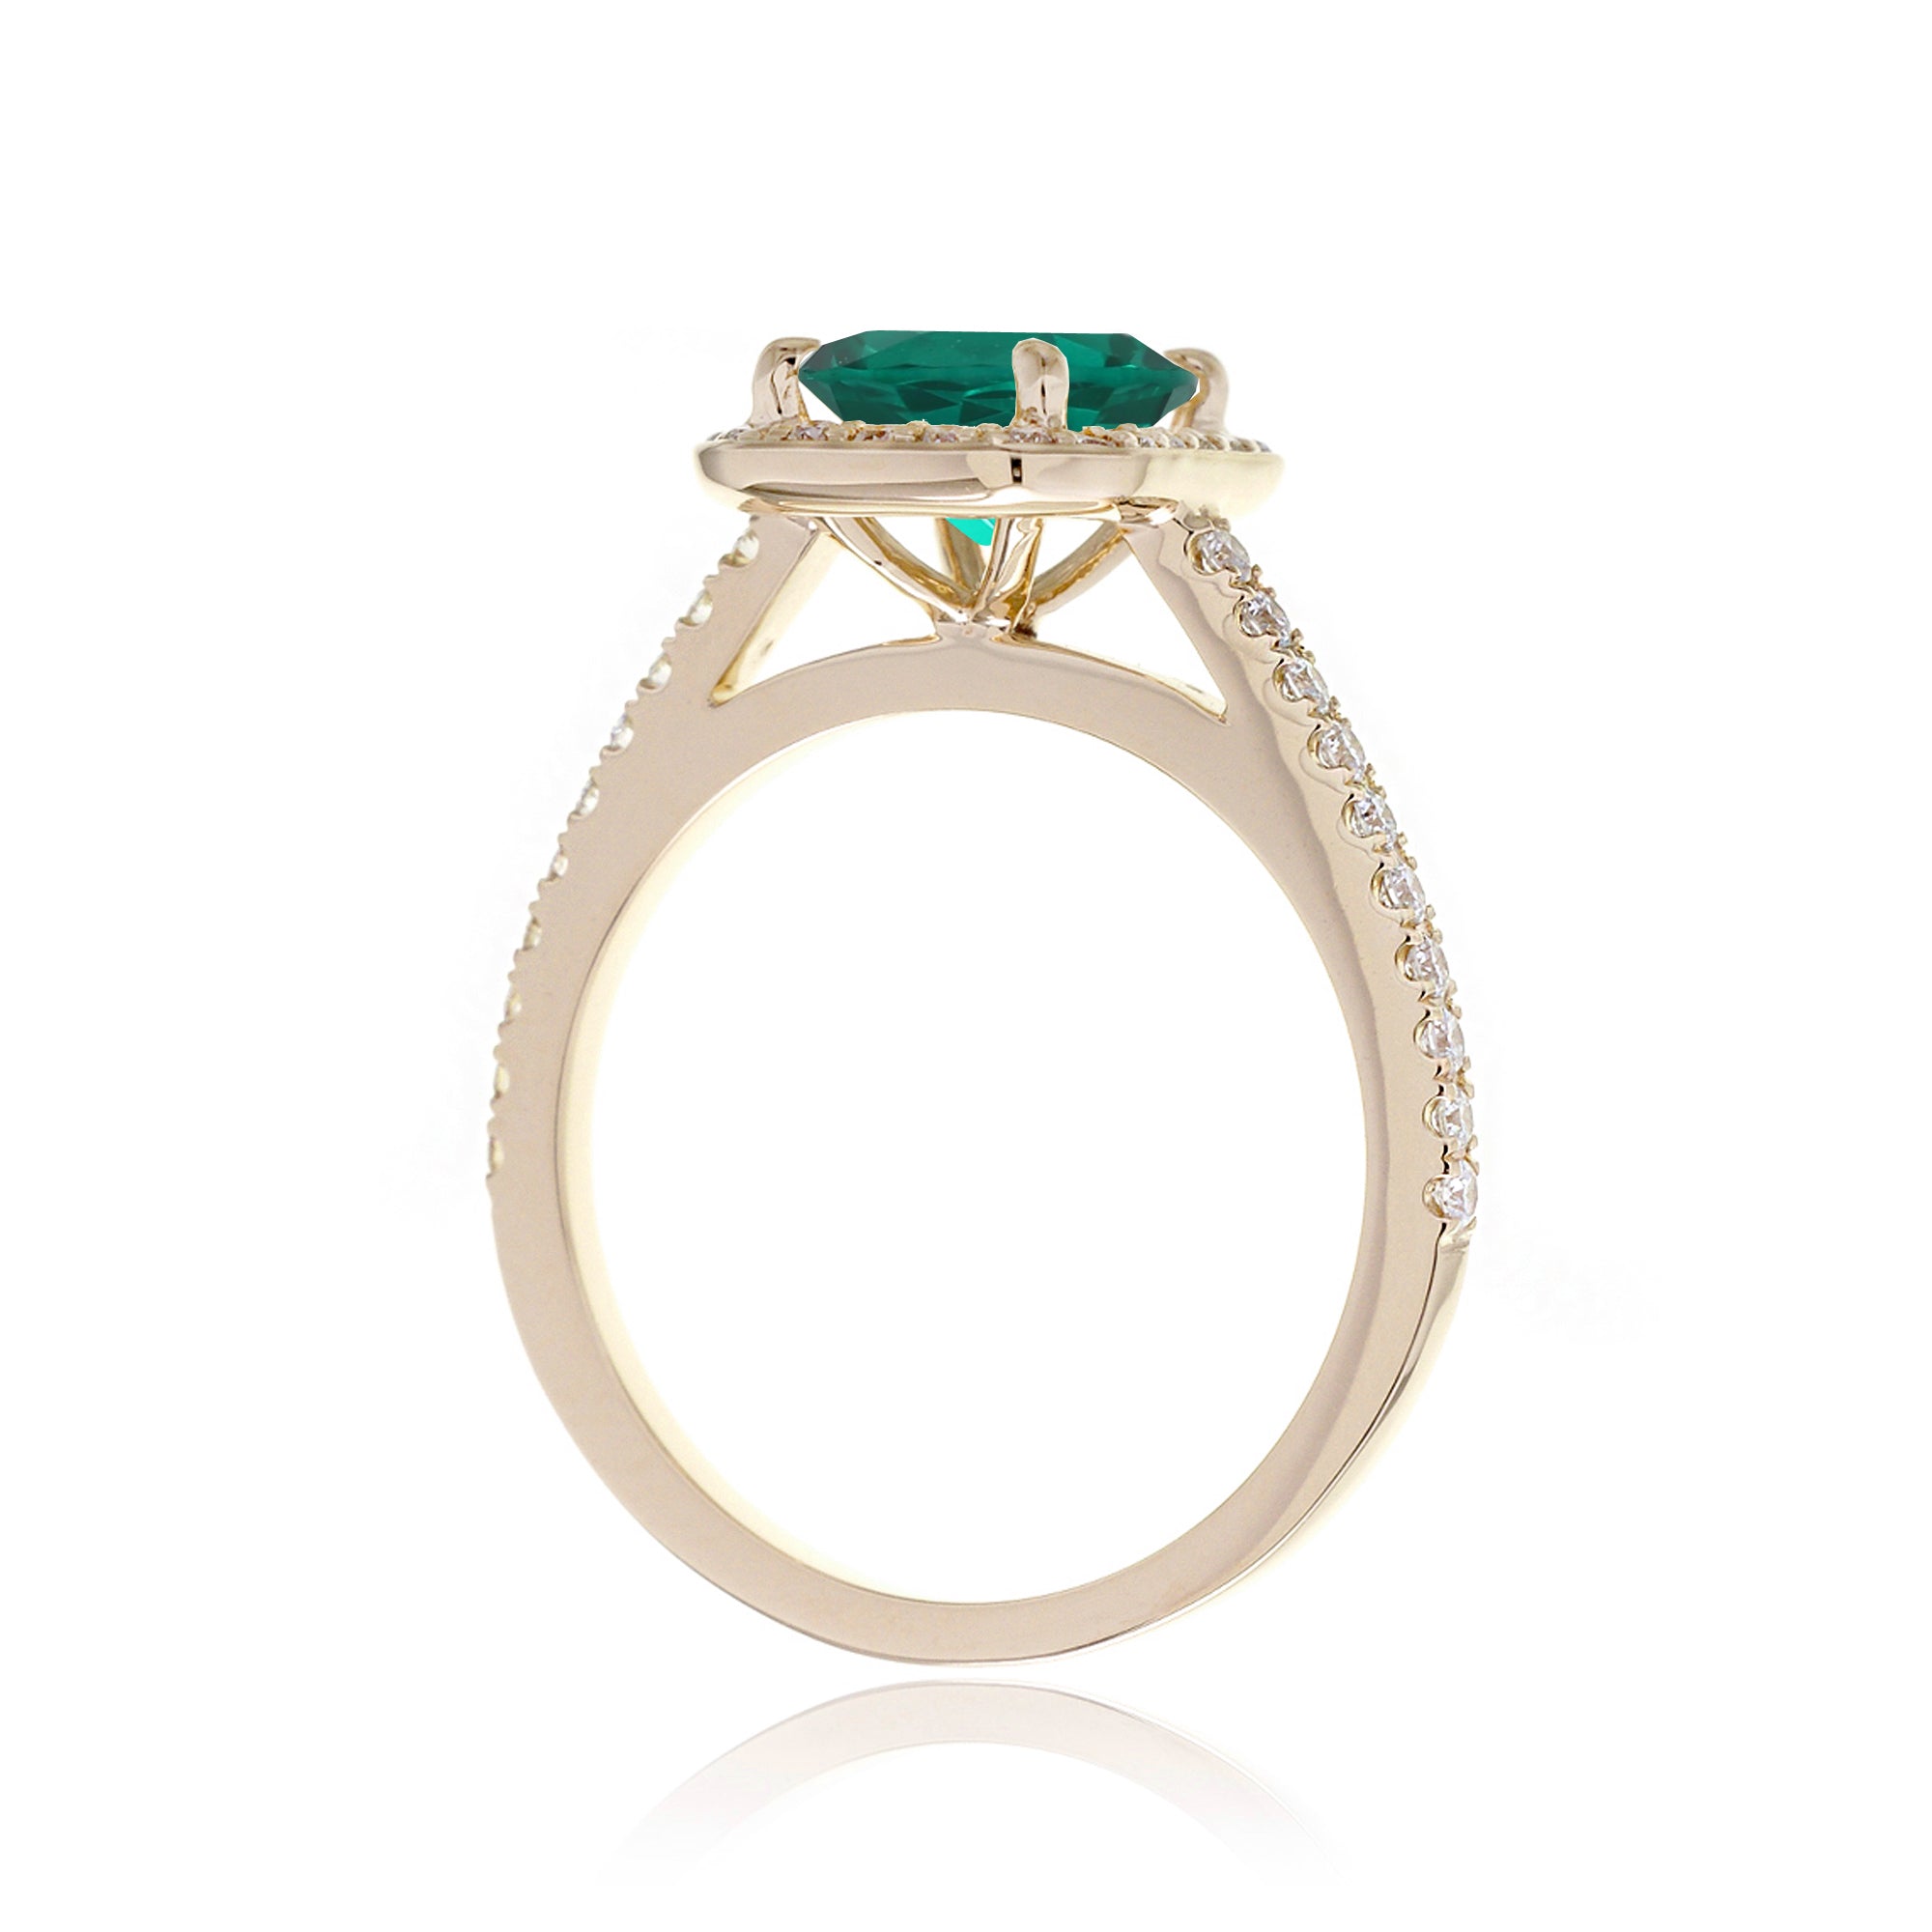 Cushion lab-grown emerald diamond halo cathedral engagement ring - the Steffy yellow gold